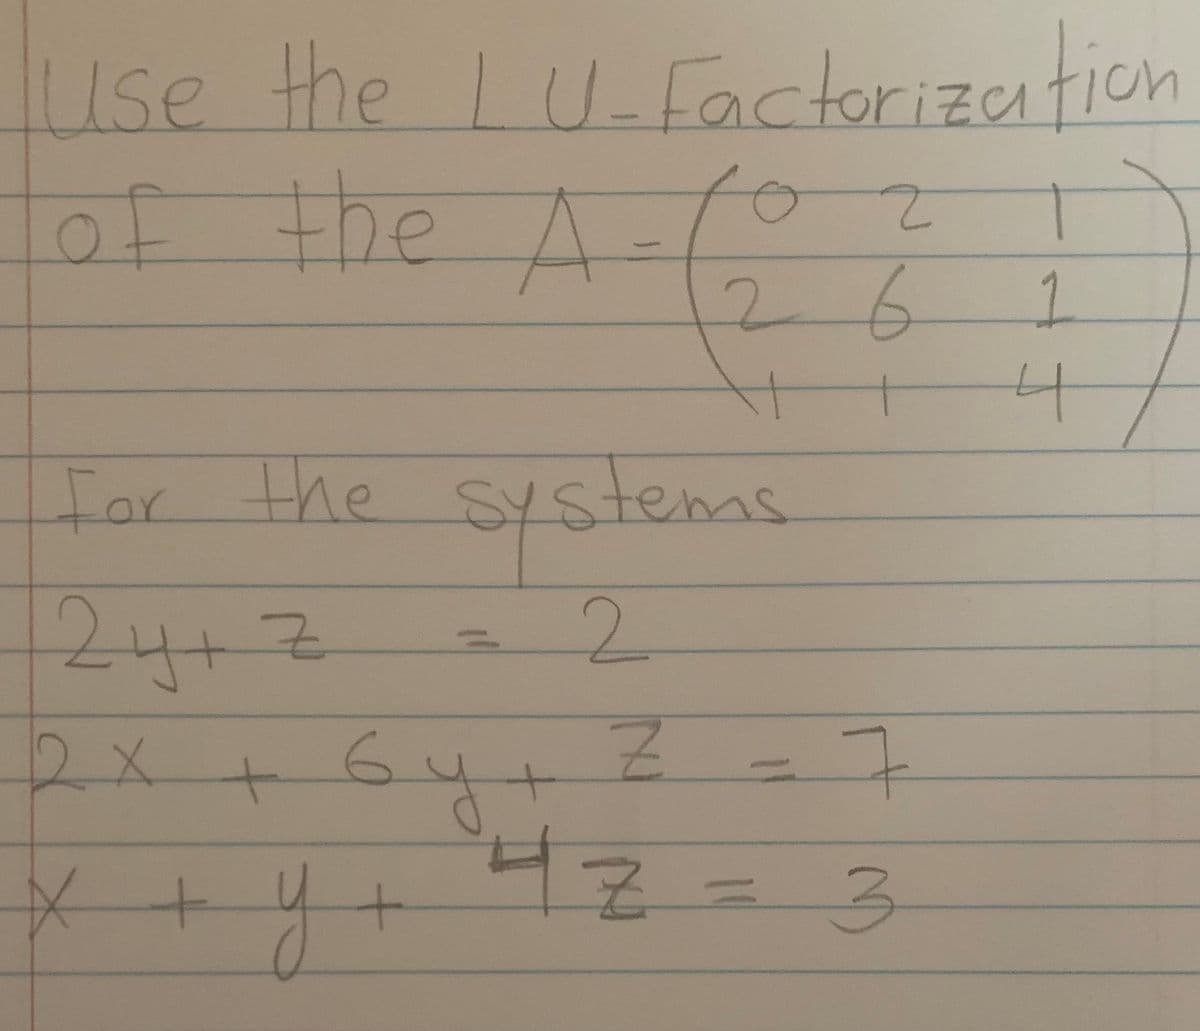 use the
LU-Factorization
of
the A
26
1.
Ior the systenas
24+2
2x+64+
2.
42=3
+
